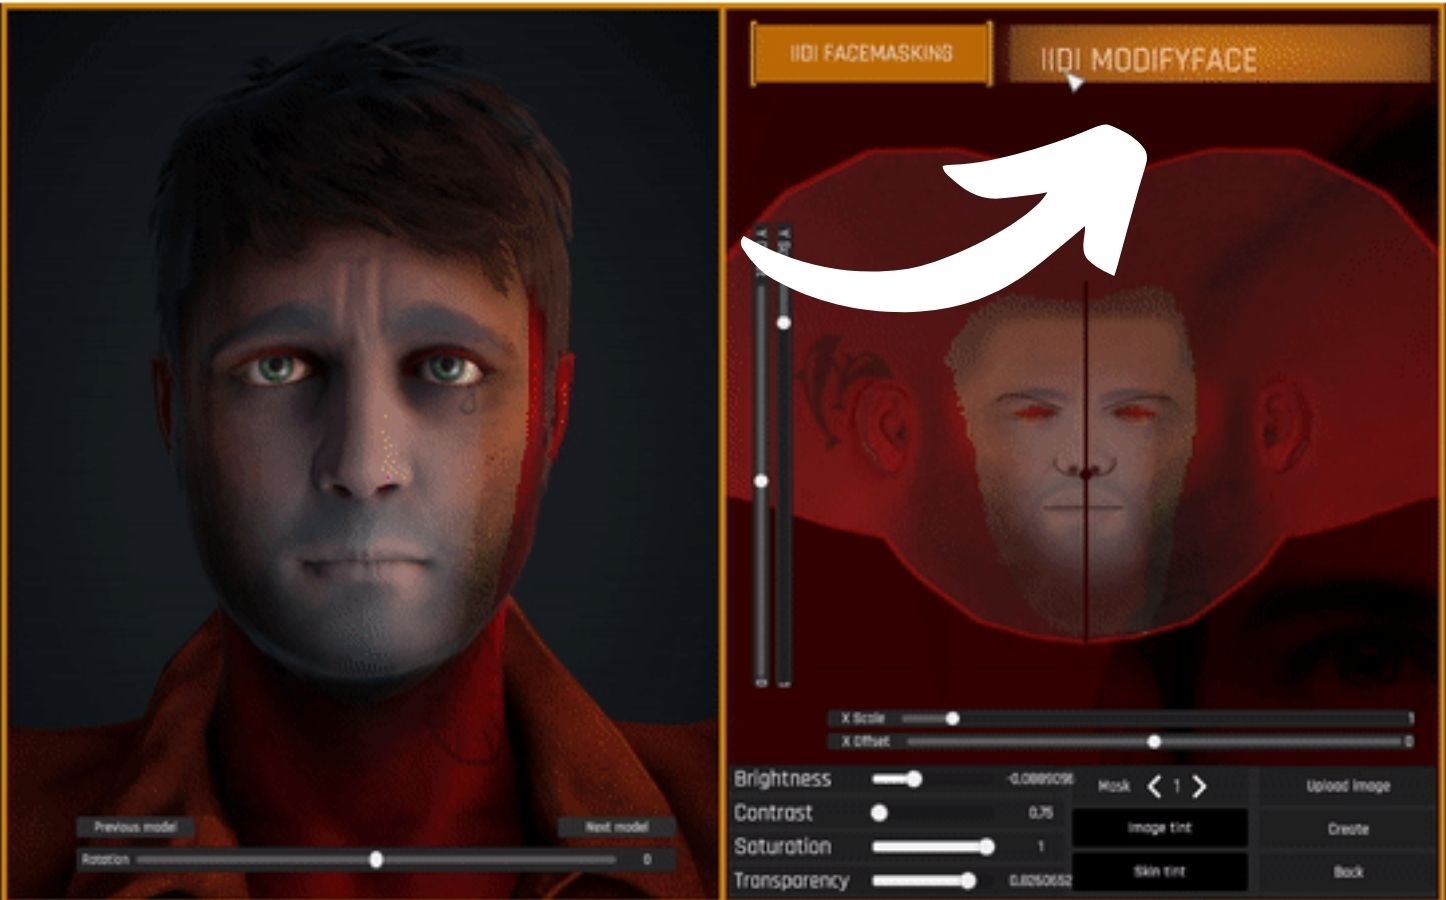 Prison Simulator How to Create Prisoner Tutorial for Workshop Guide - Import your own face to Prison - 2505531